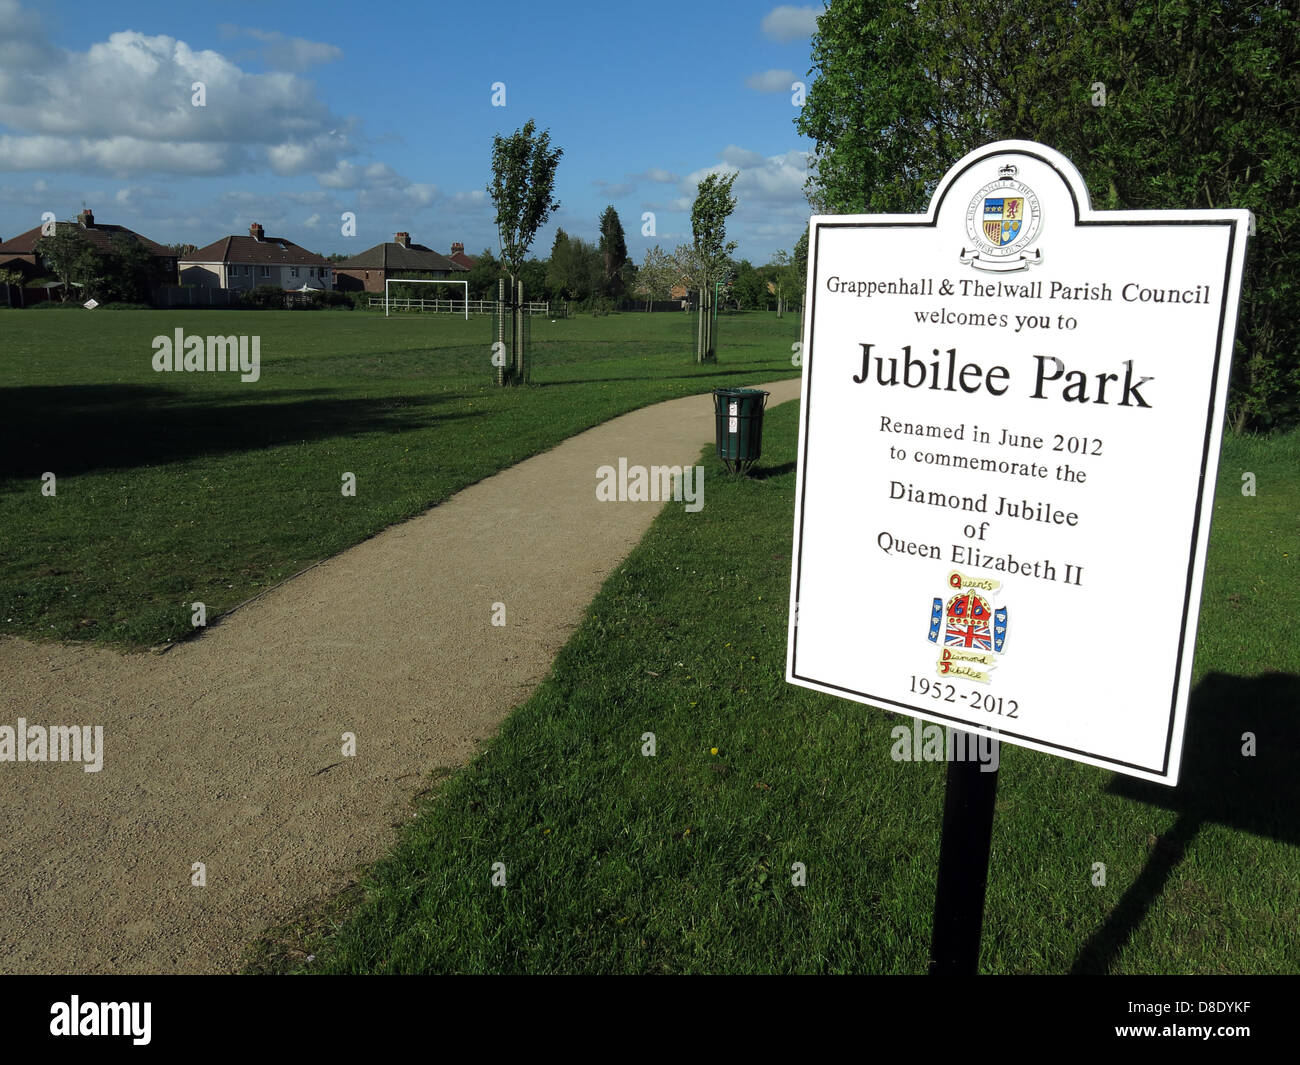 Grappenhall & Thelwall parish council Jubilee Park renamed 2012 Queen Elizabeth diamond jubilee year Stock Photo